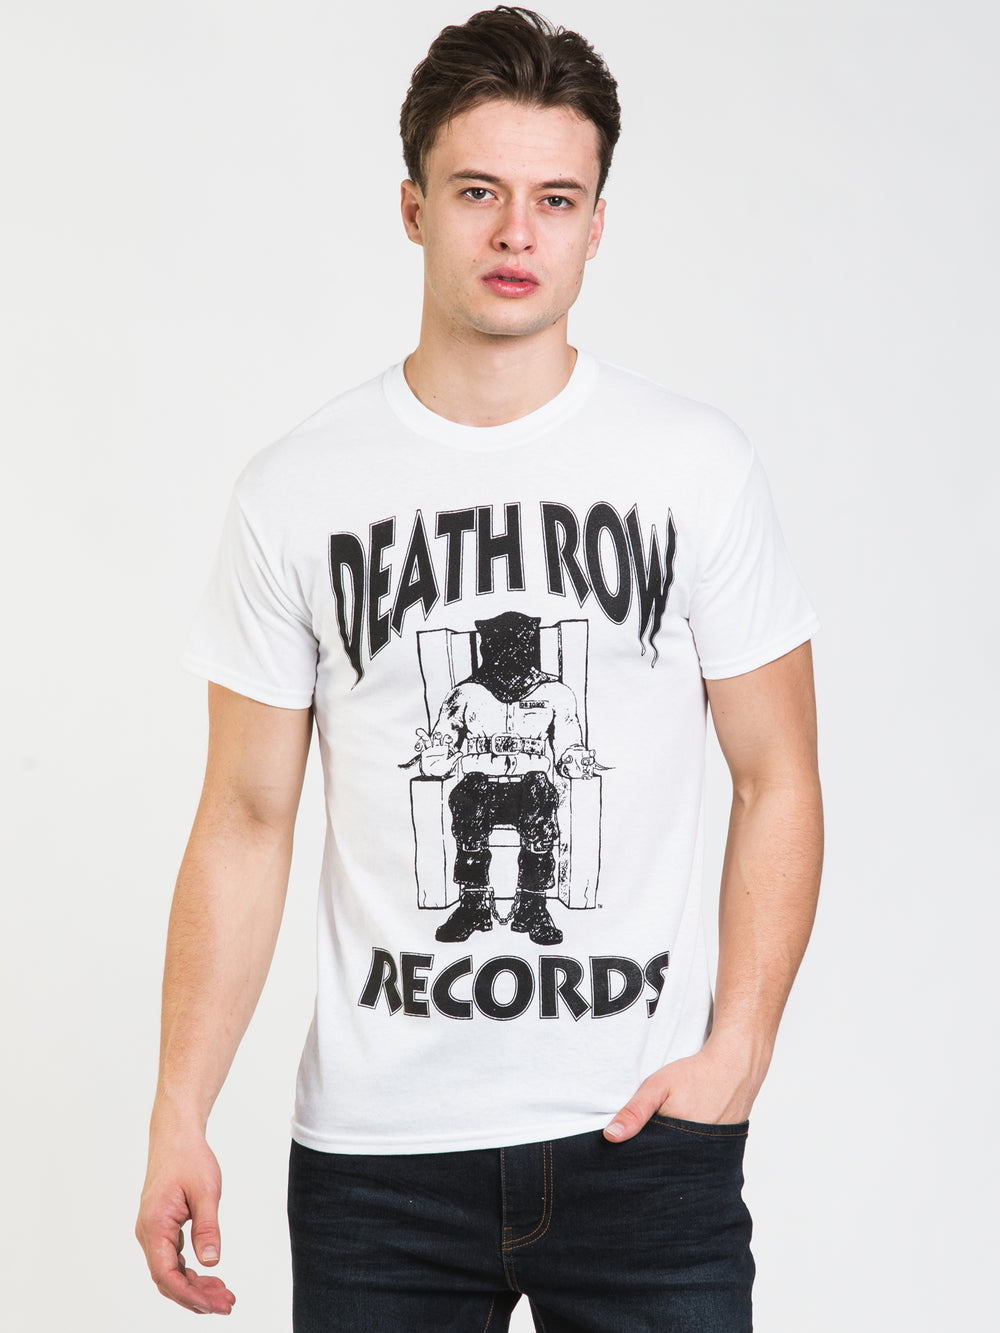 DEATH ROW RECORDS T-SHIRT - CLEARANCE